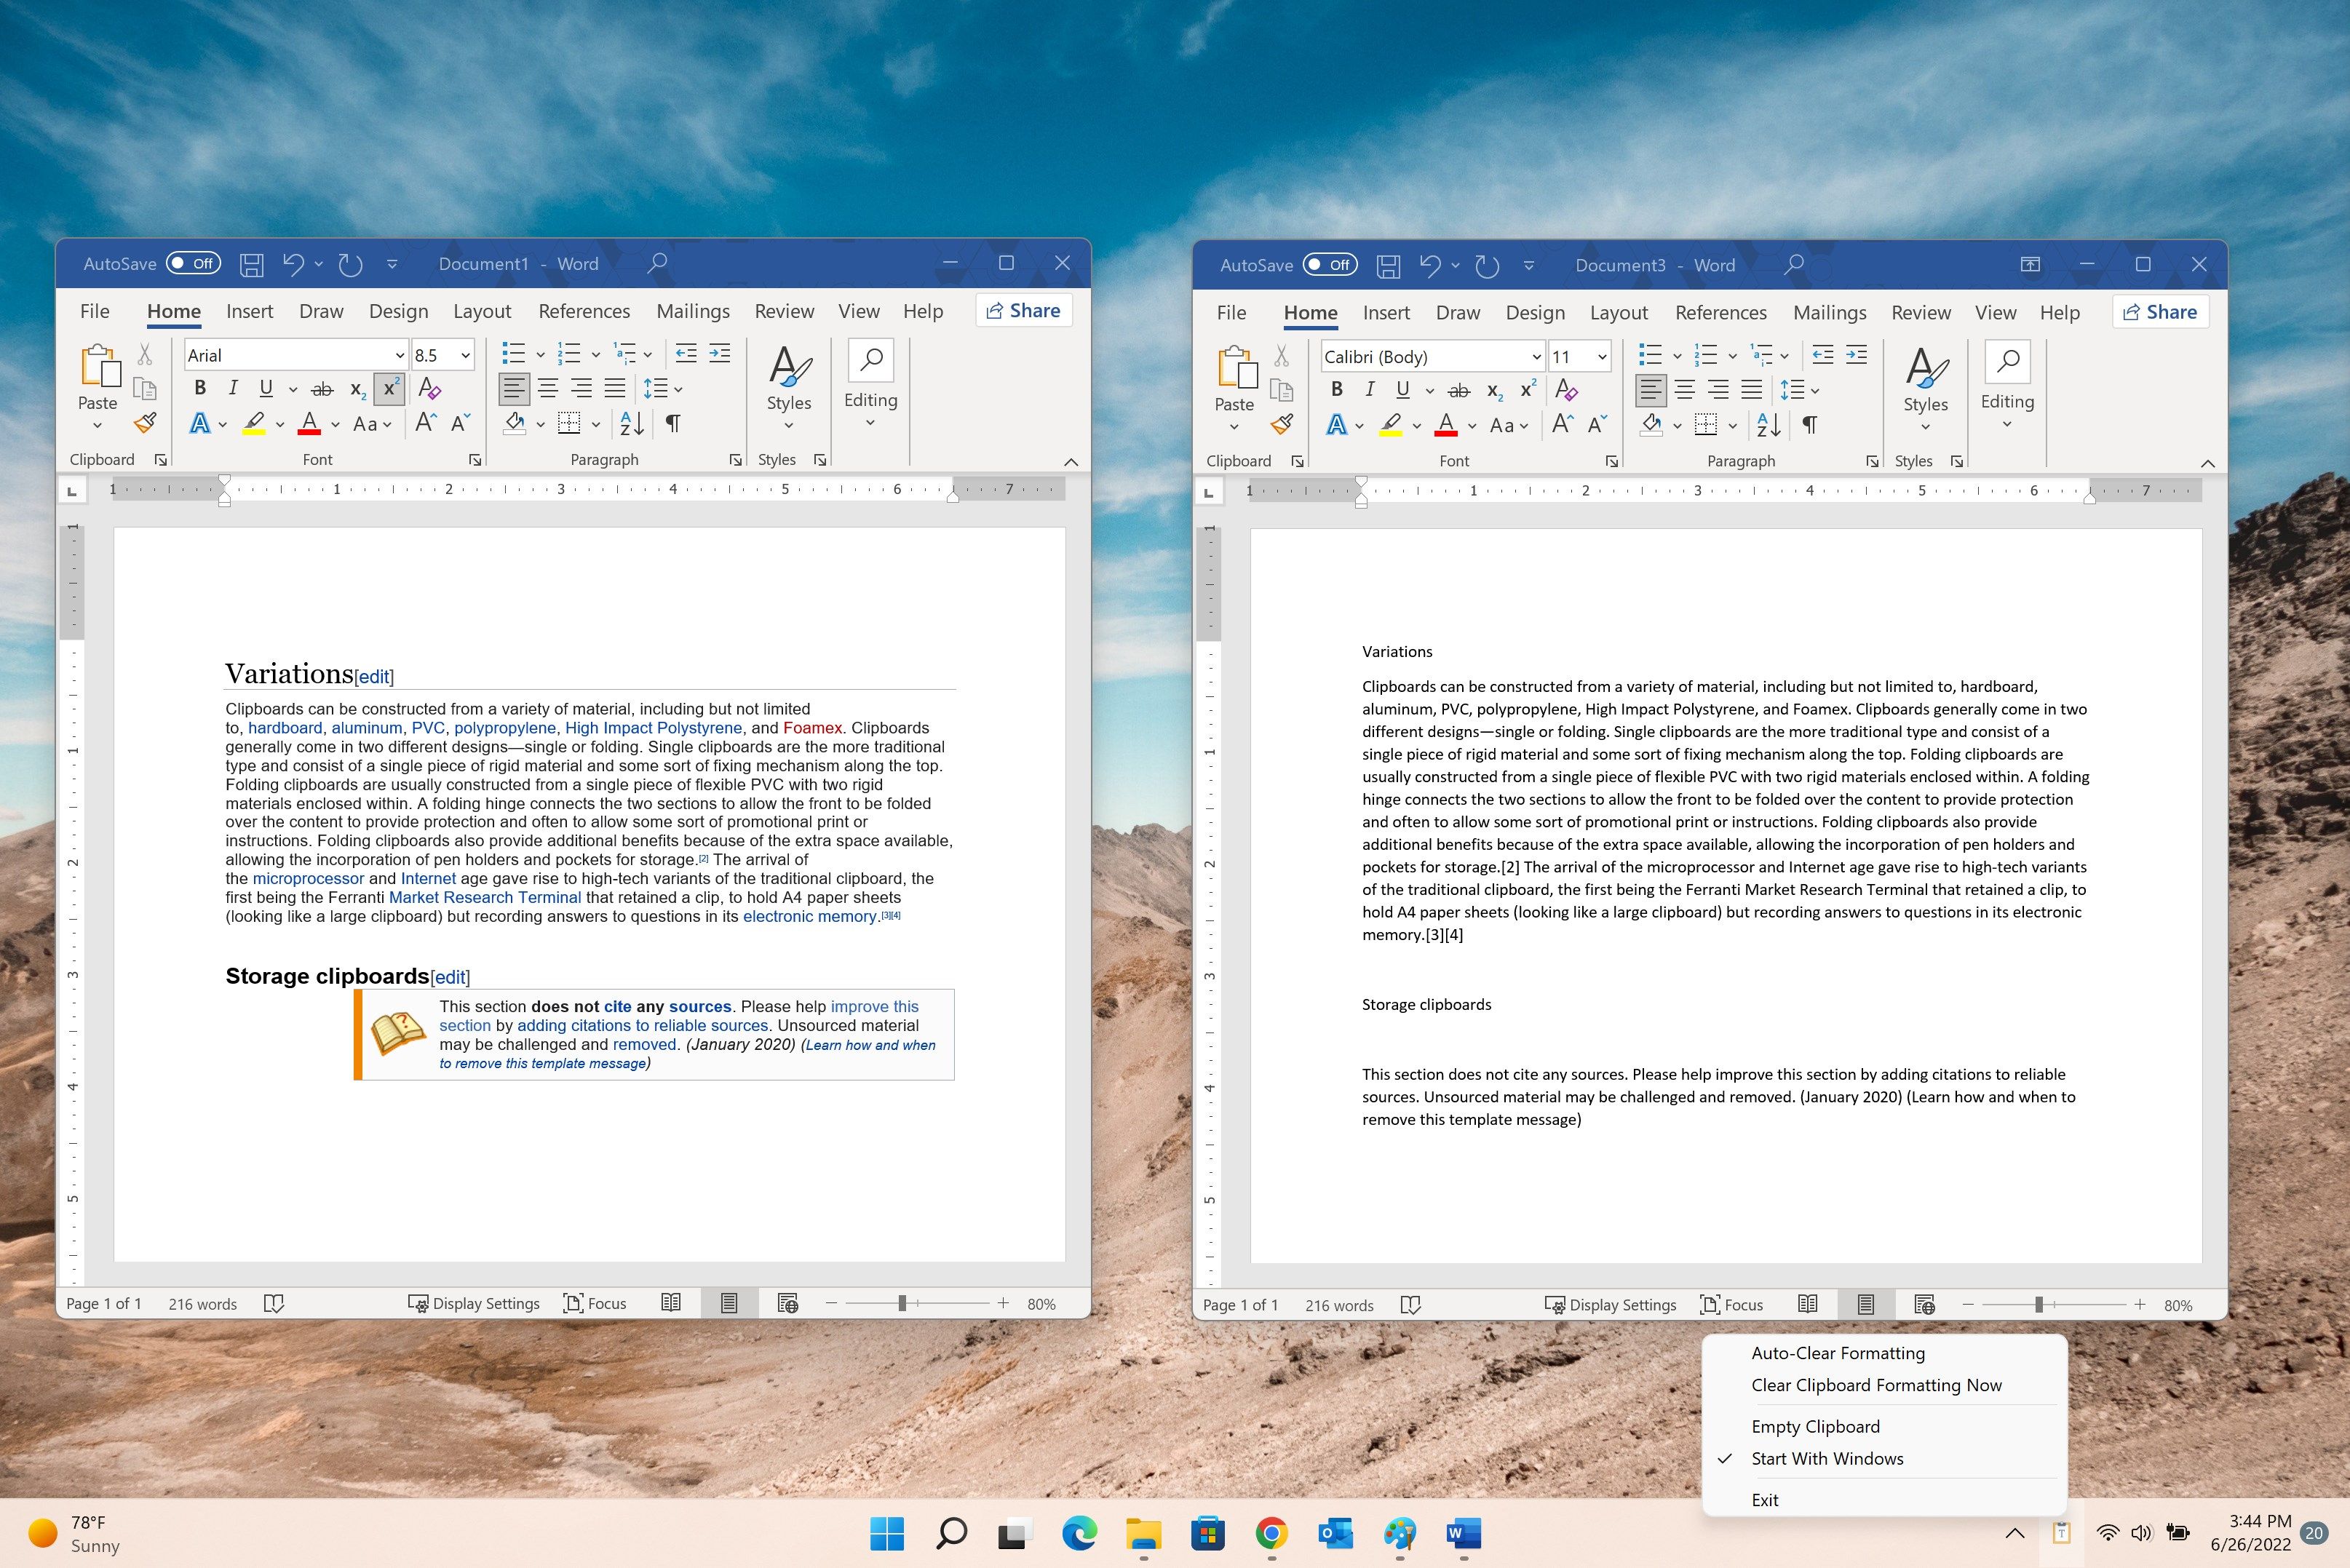 Turn any formatted text in your clipboard to simple text